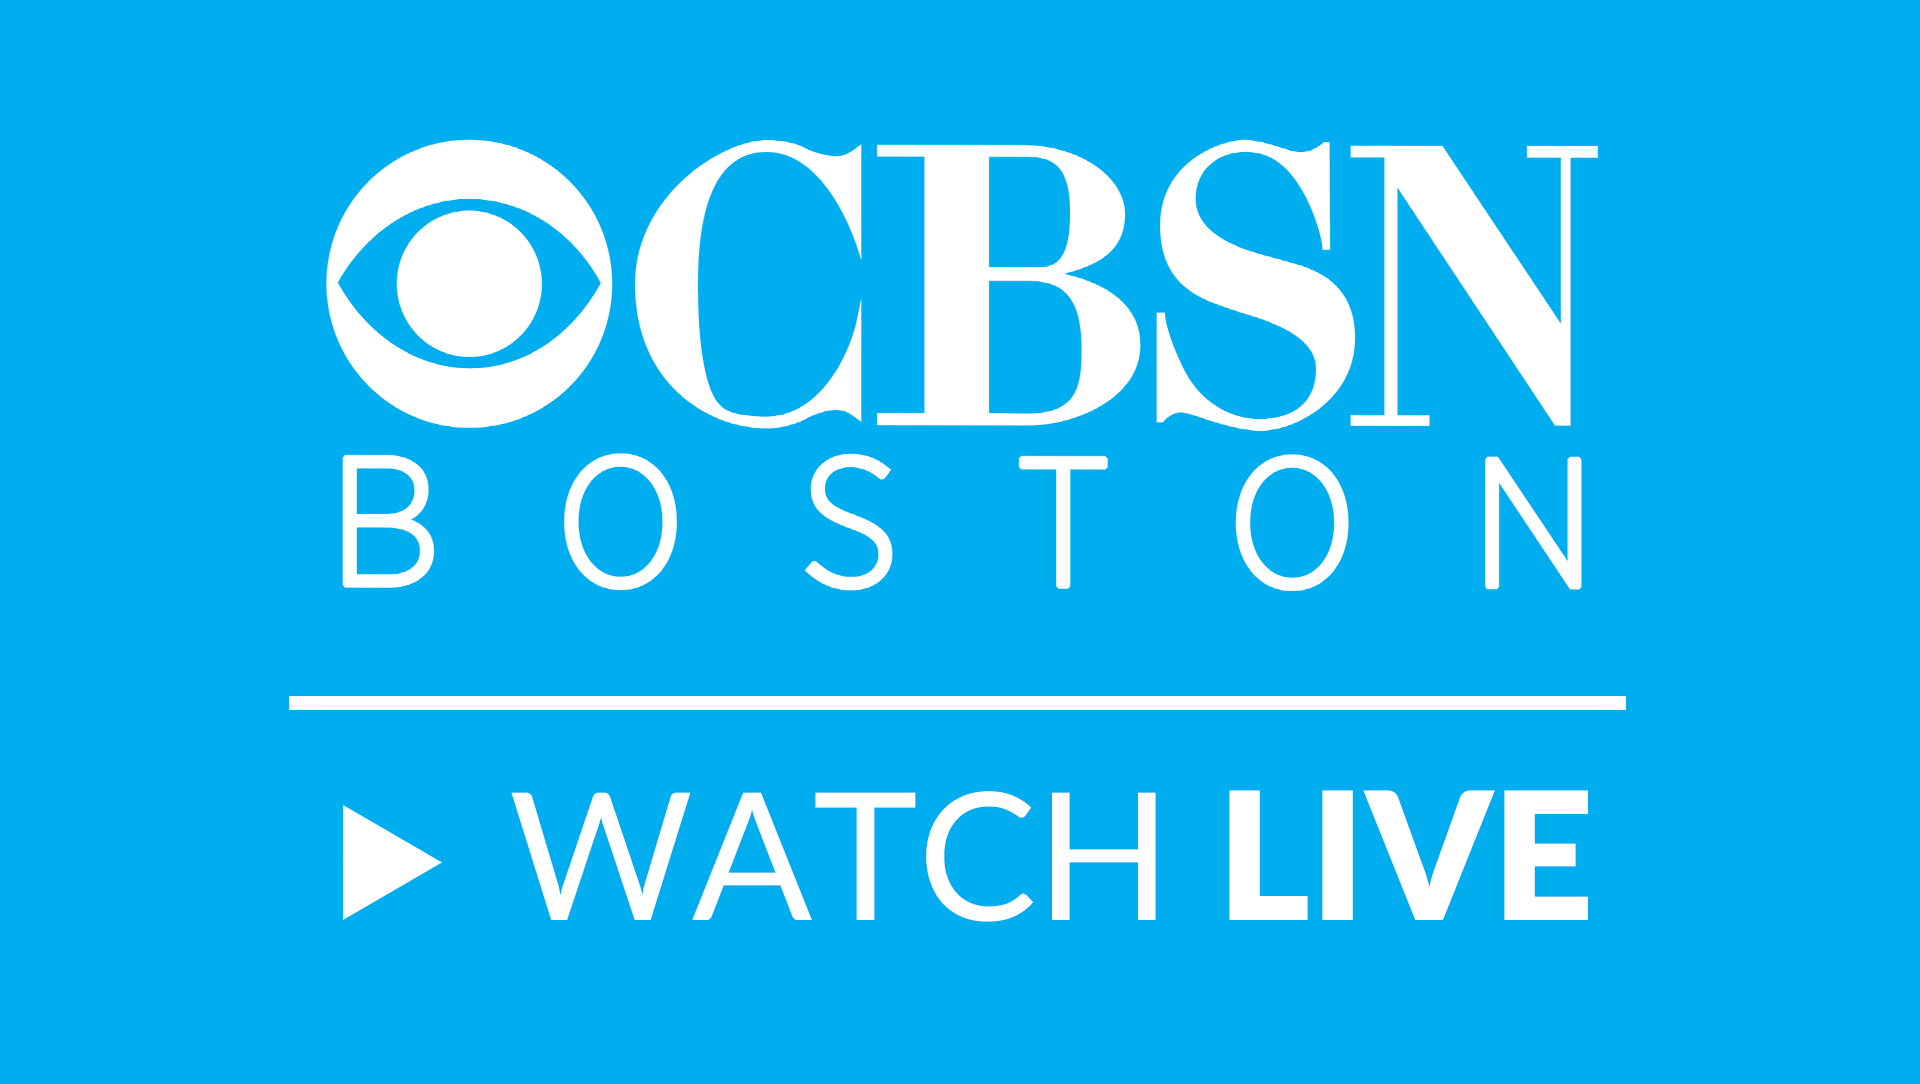 George Clooney Spotted In Ashby In Latest Movie Shoot In Massachusetts Boston-WatchLive